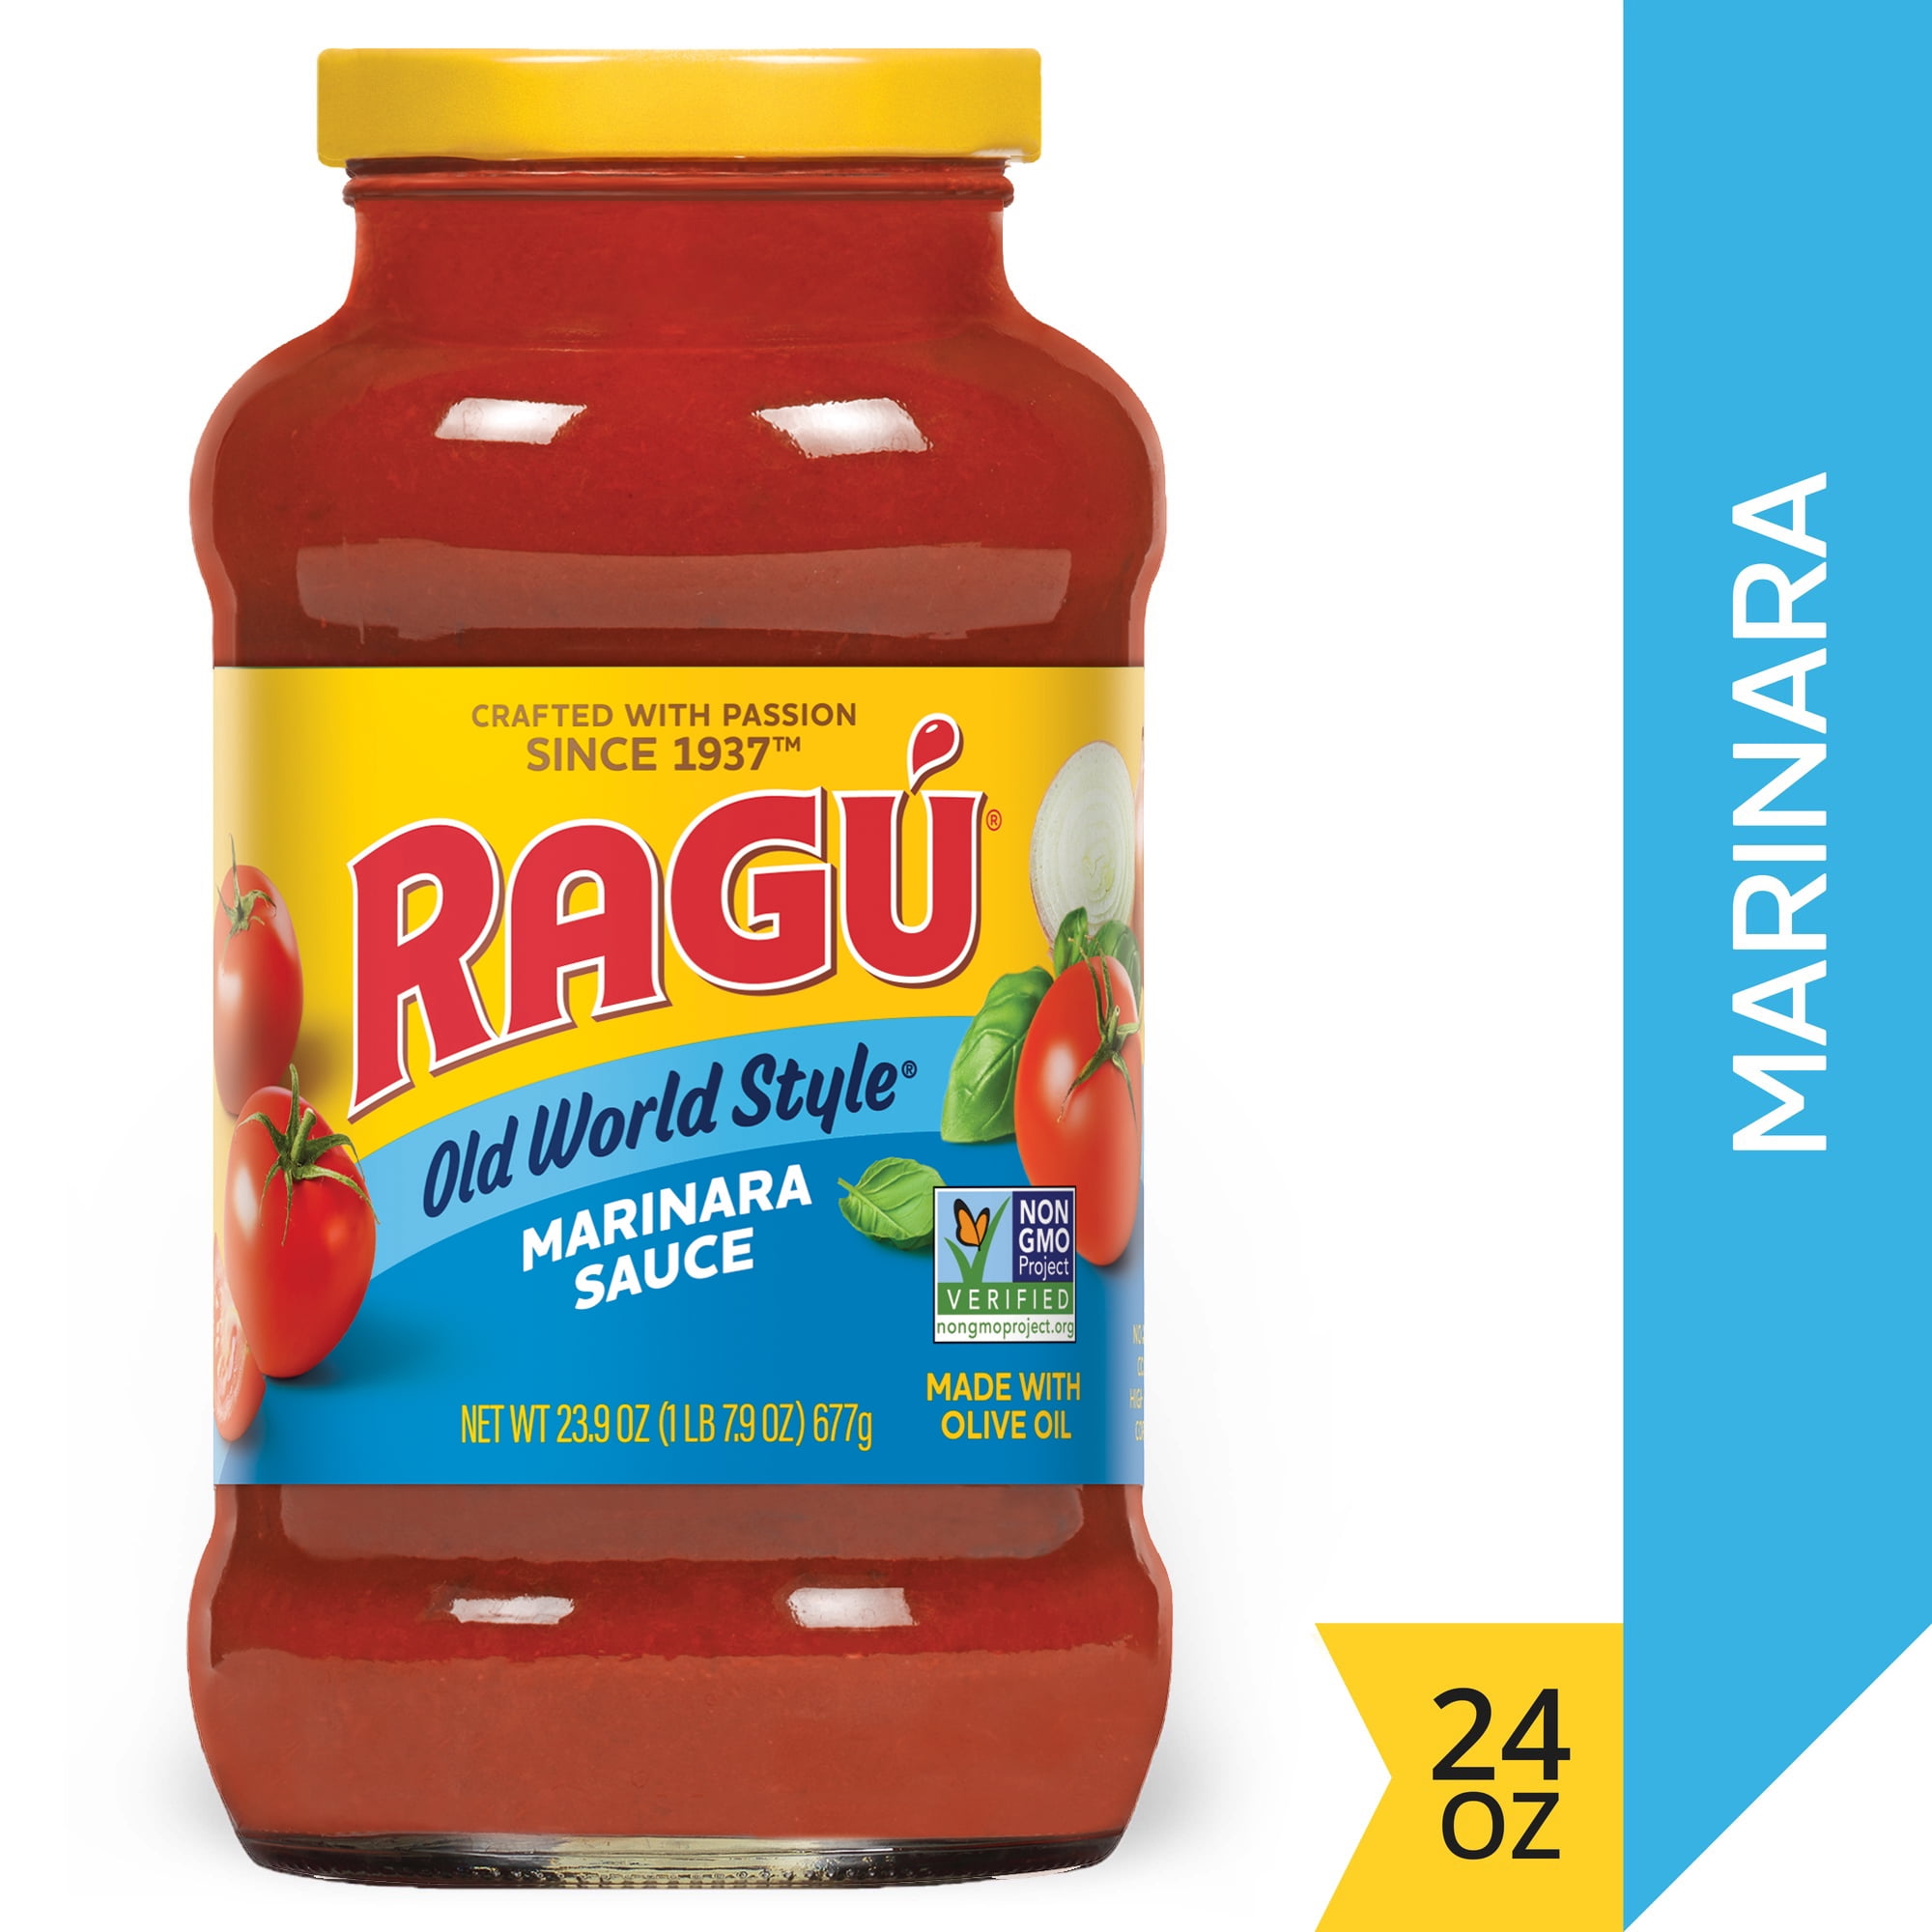 Ragu Old World Style Marinara Sauce, Perfect for Italian Style Meals at Home, 24 OZ